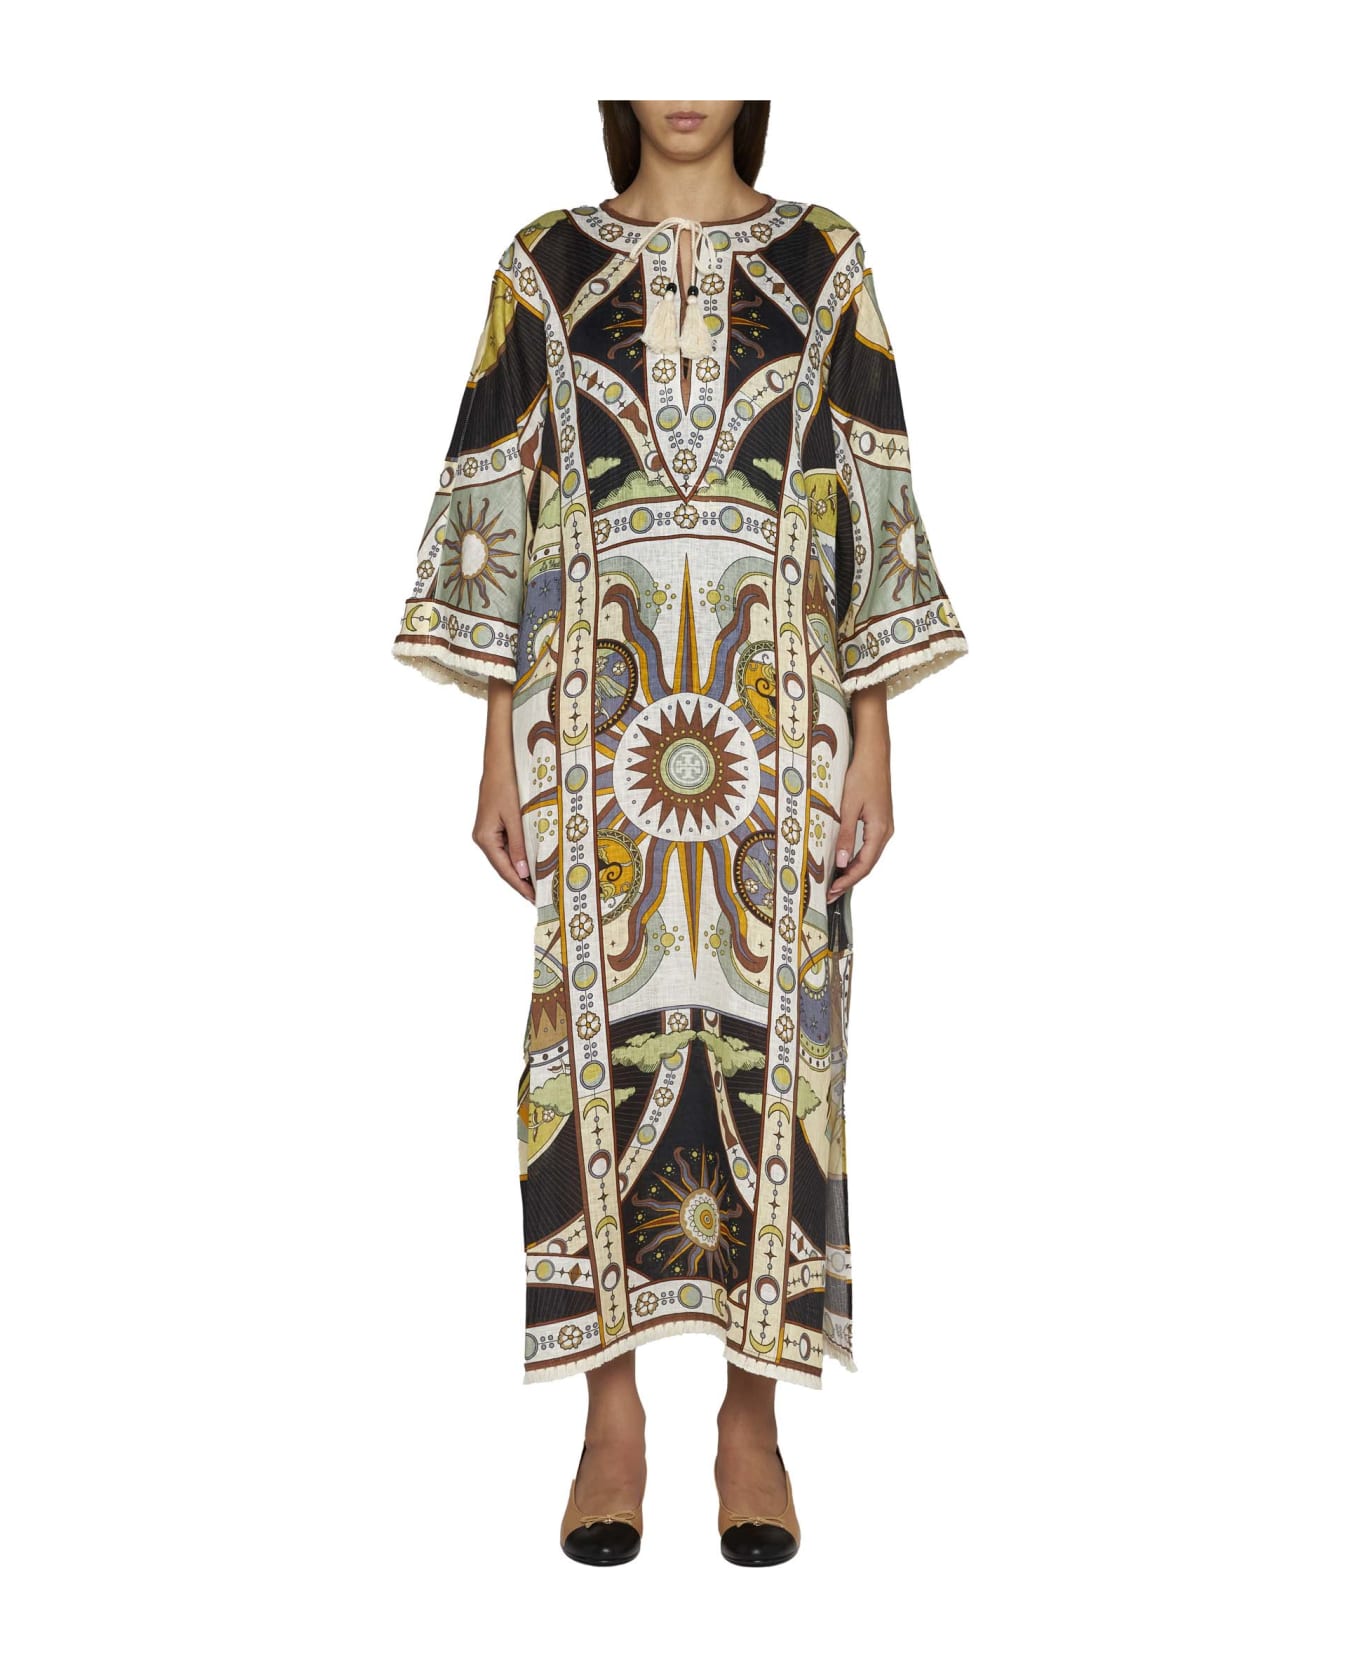 Tory Burch Kaftan With All-over Graphic Print In Linen - Navy sundial